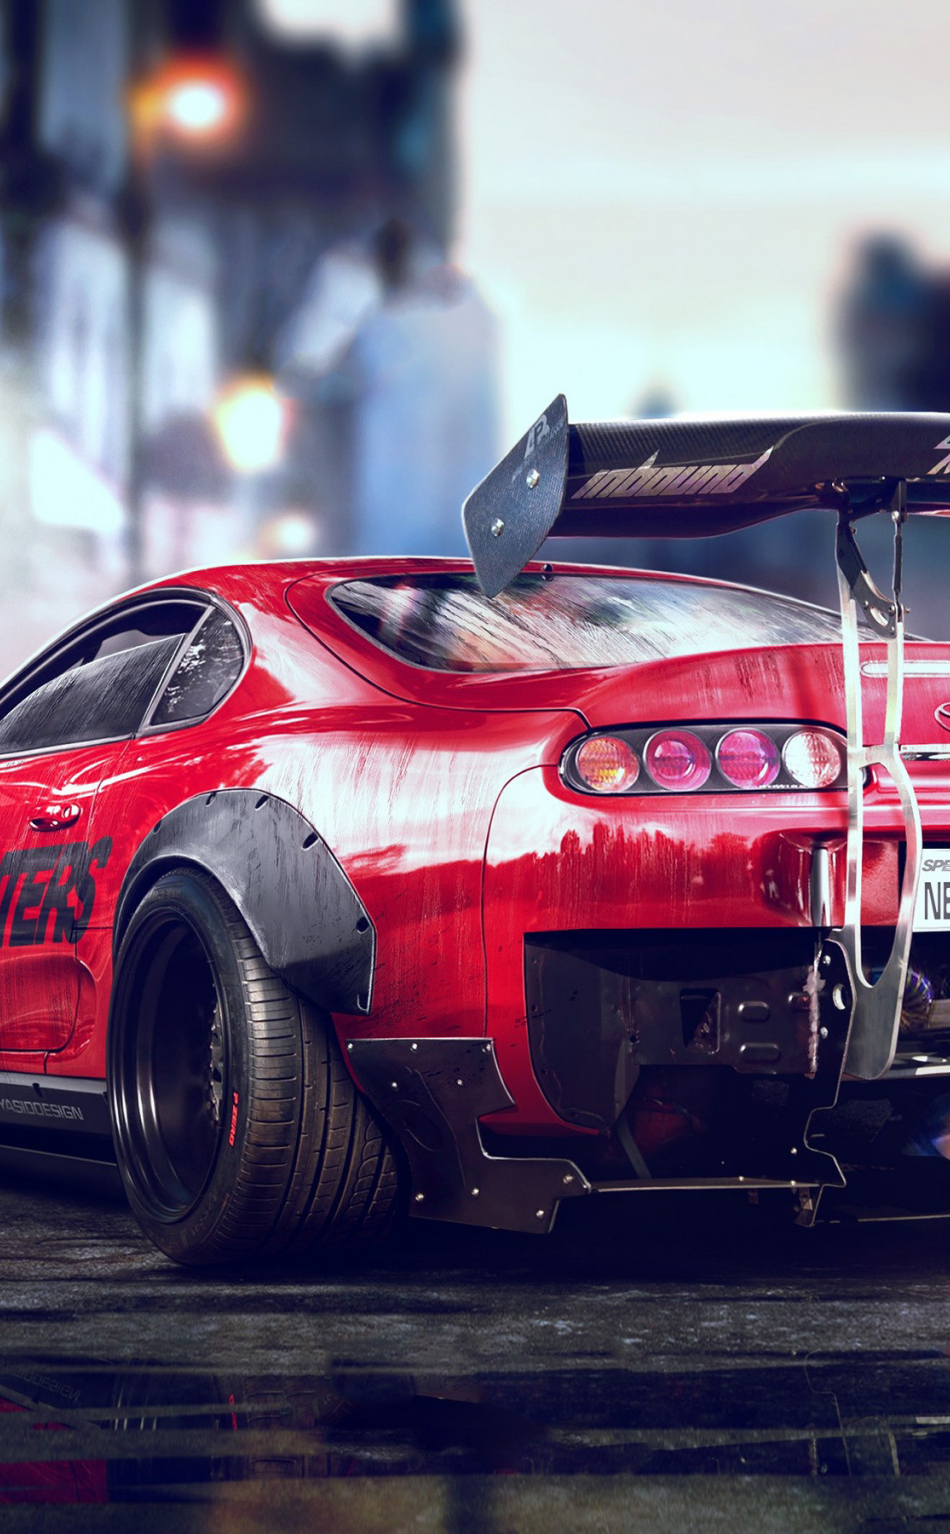 Download wallpaper 950x1534 toyota supra, need for speed payback, video game, iphone, 950x1534 HD background, 6951